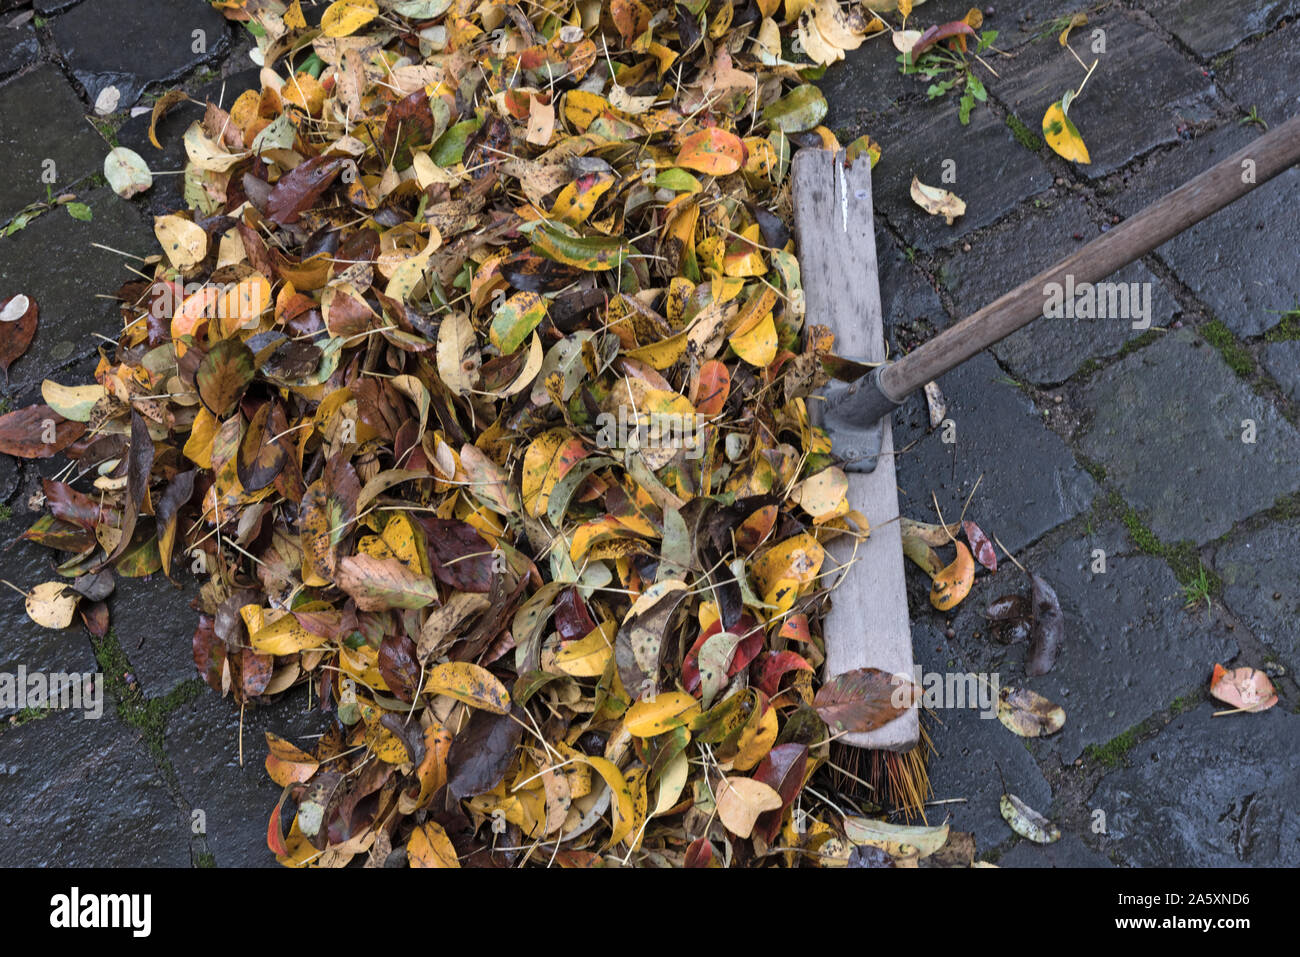 Pile of autumn leaves on paving stones and a broom Stock Photo